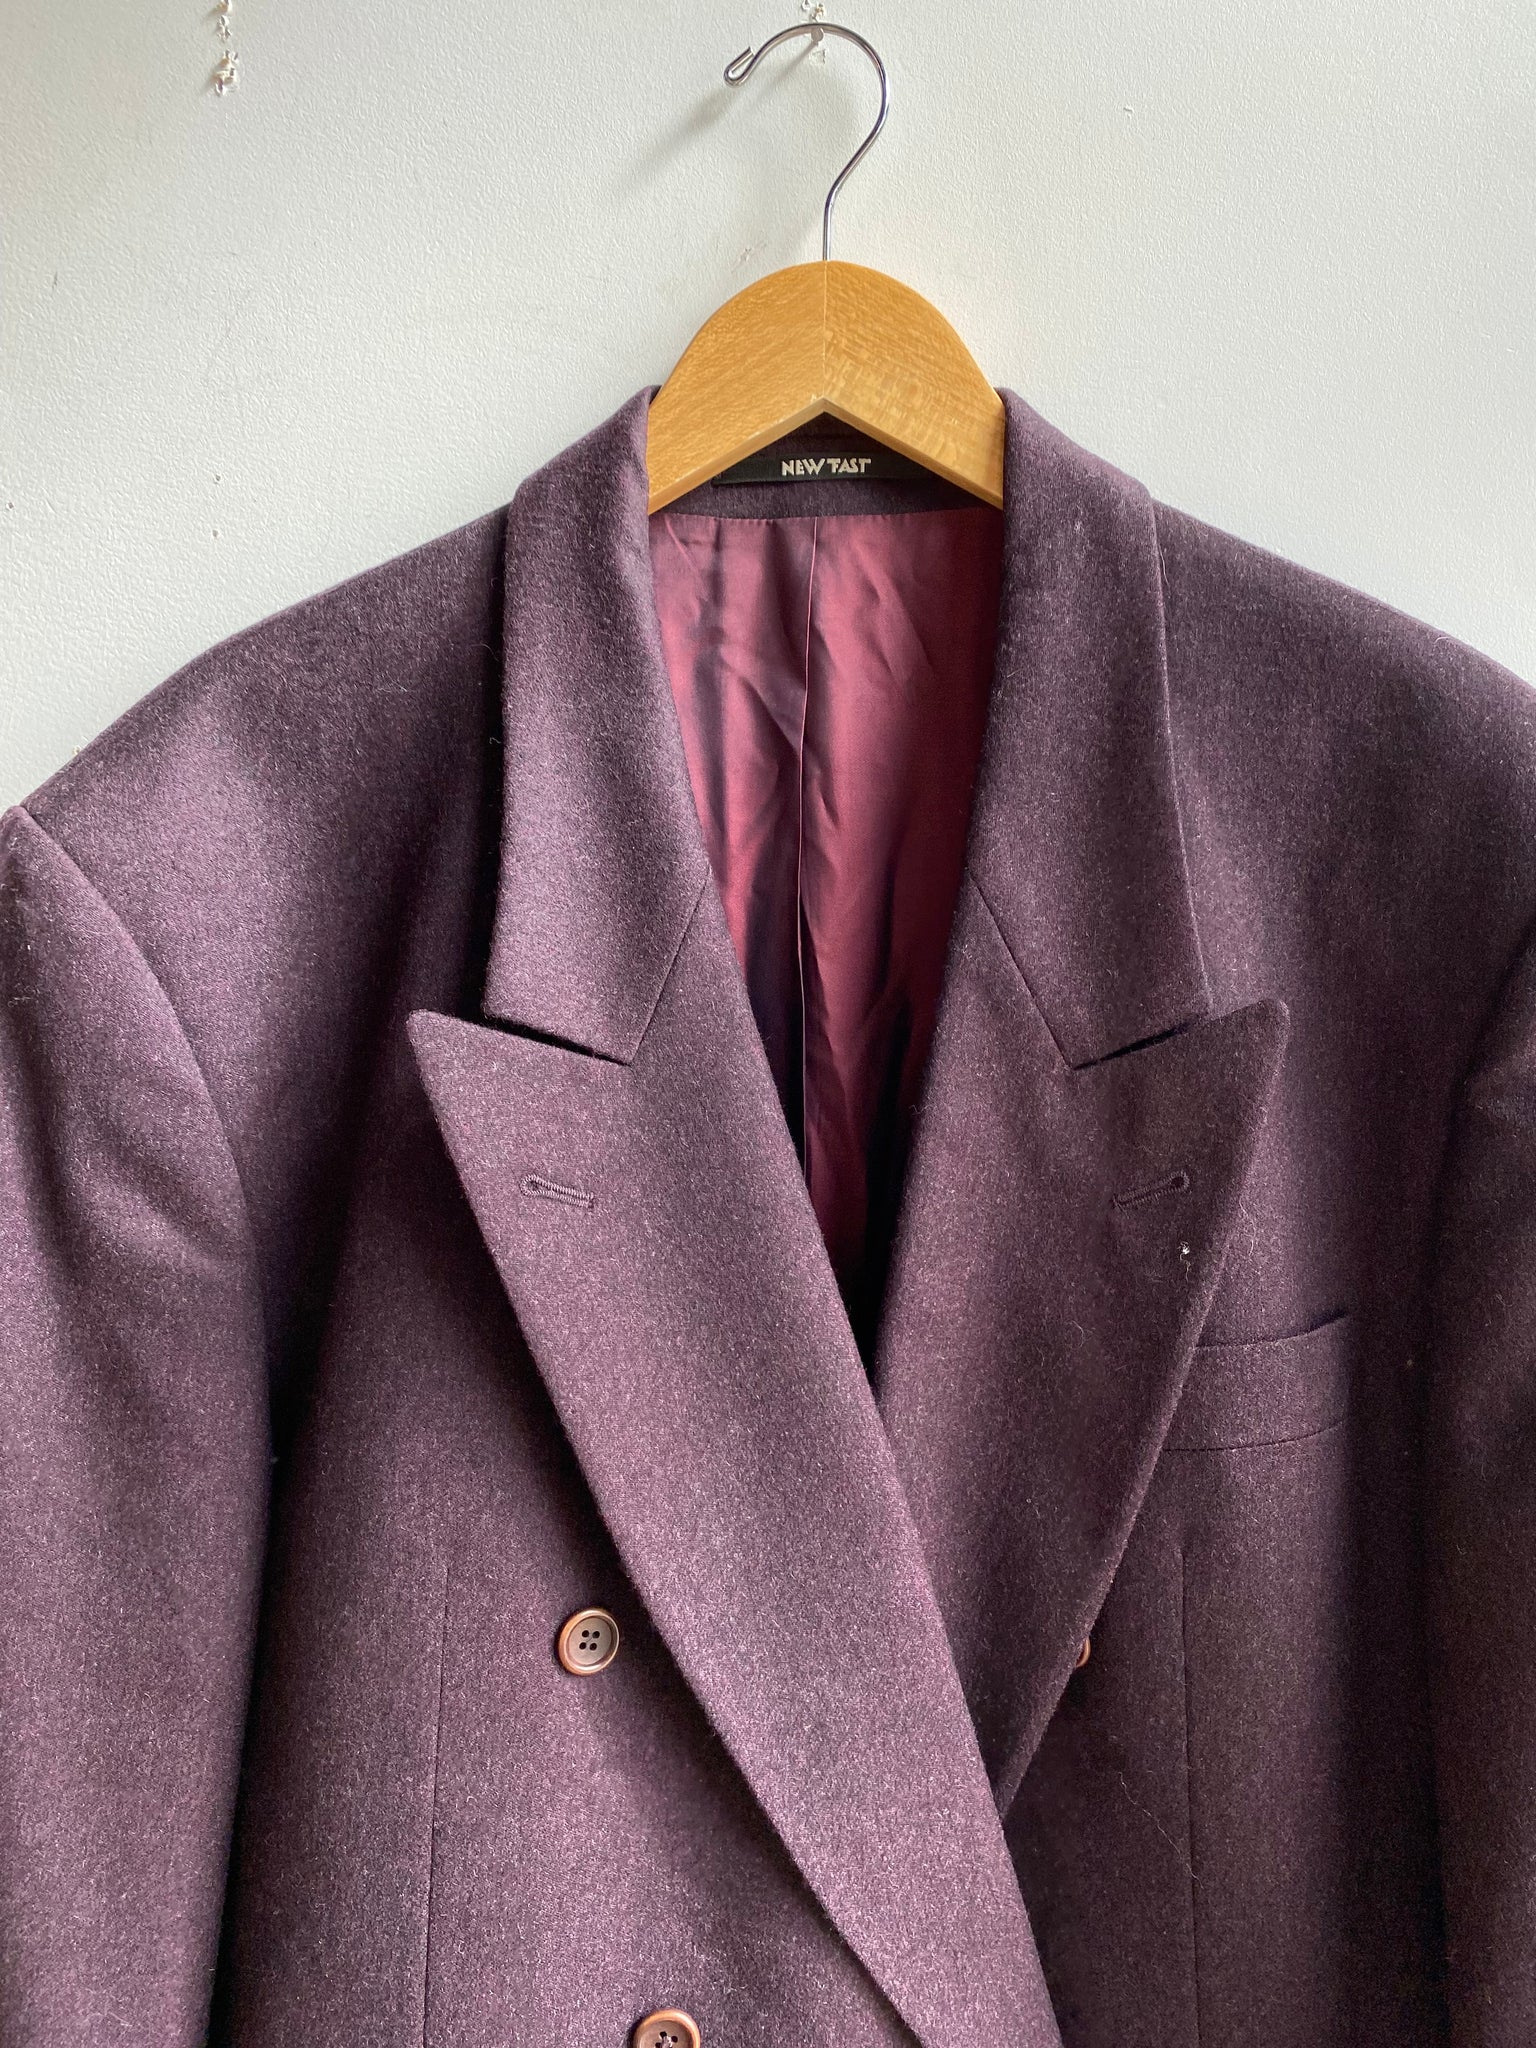 90s Plum Wool "New Fast" Double Breasted Blazer